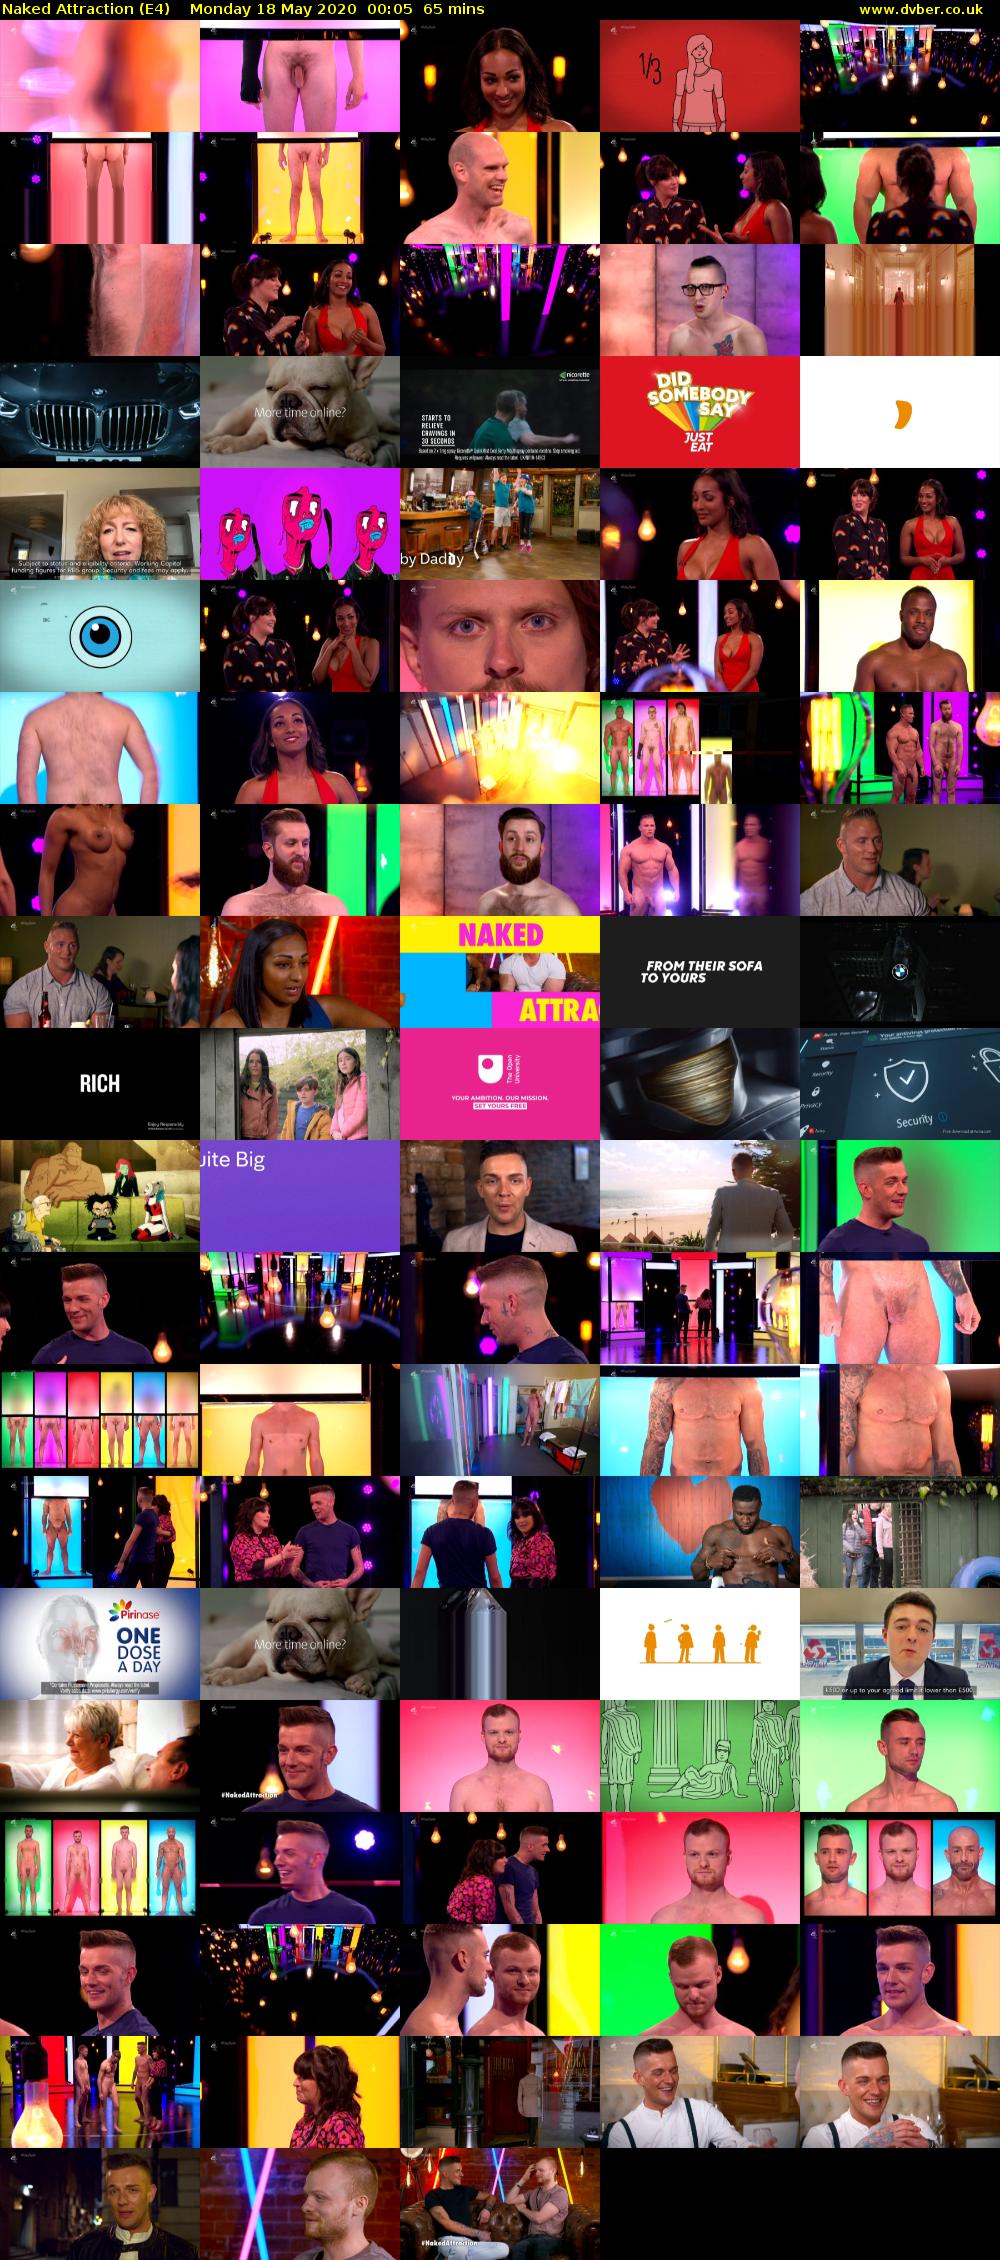 Naked Attraction (E4) Monday 18 May 2020 00:05 - 01:10